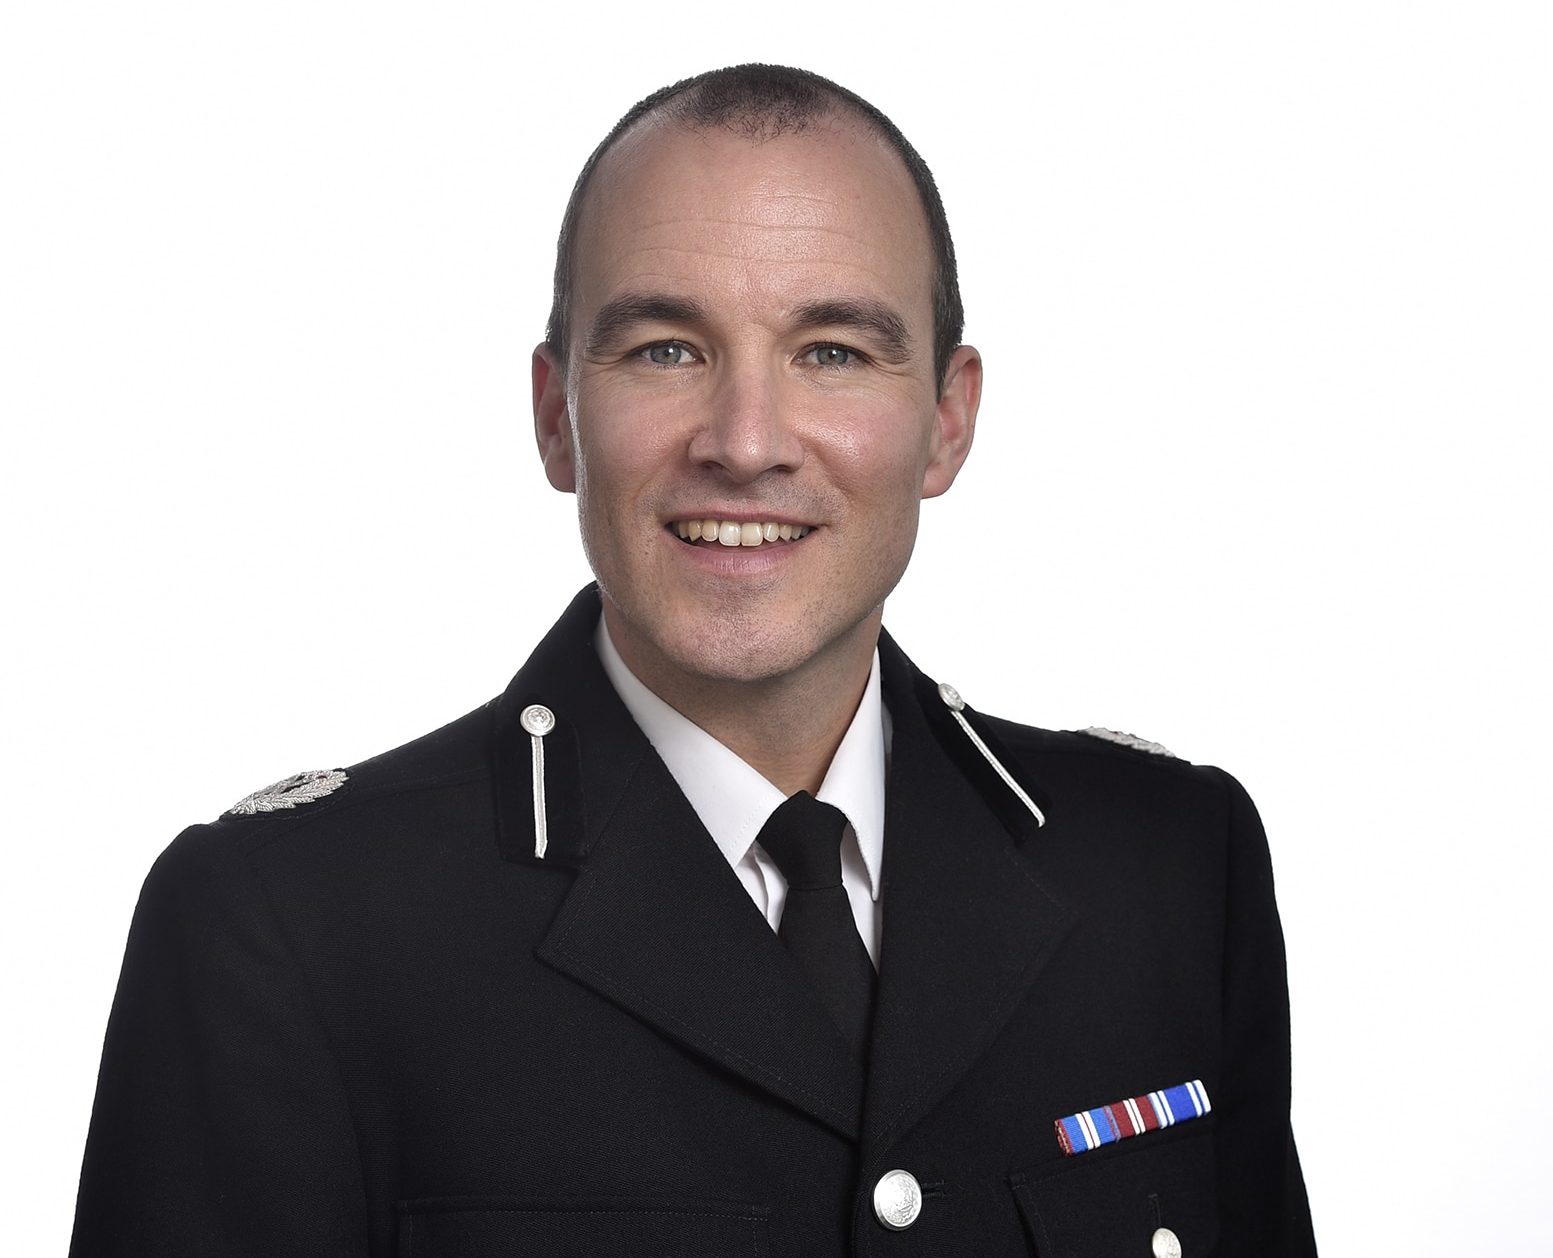 Preferred candidate for Chief Constable of Surrey Police Tim De Meyer